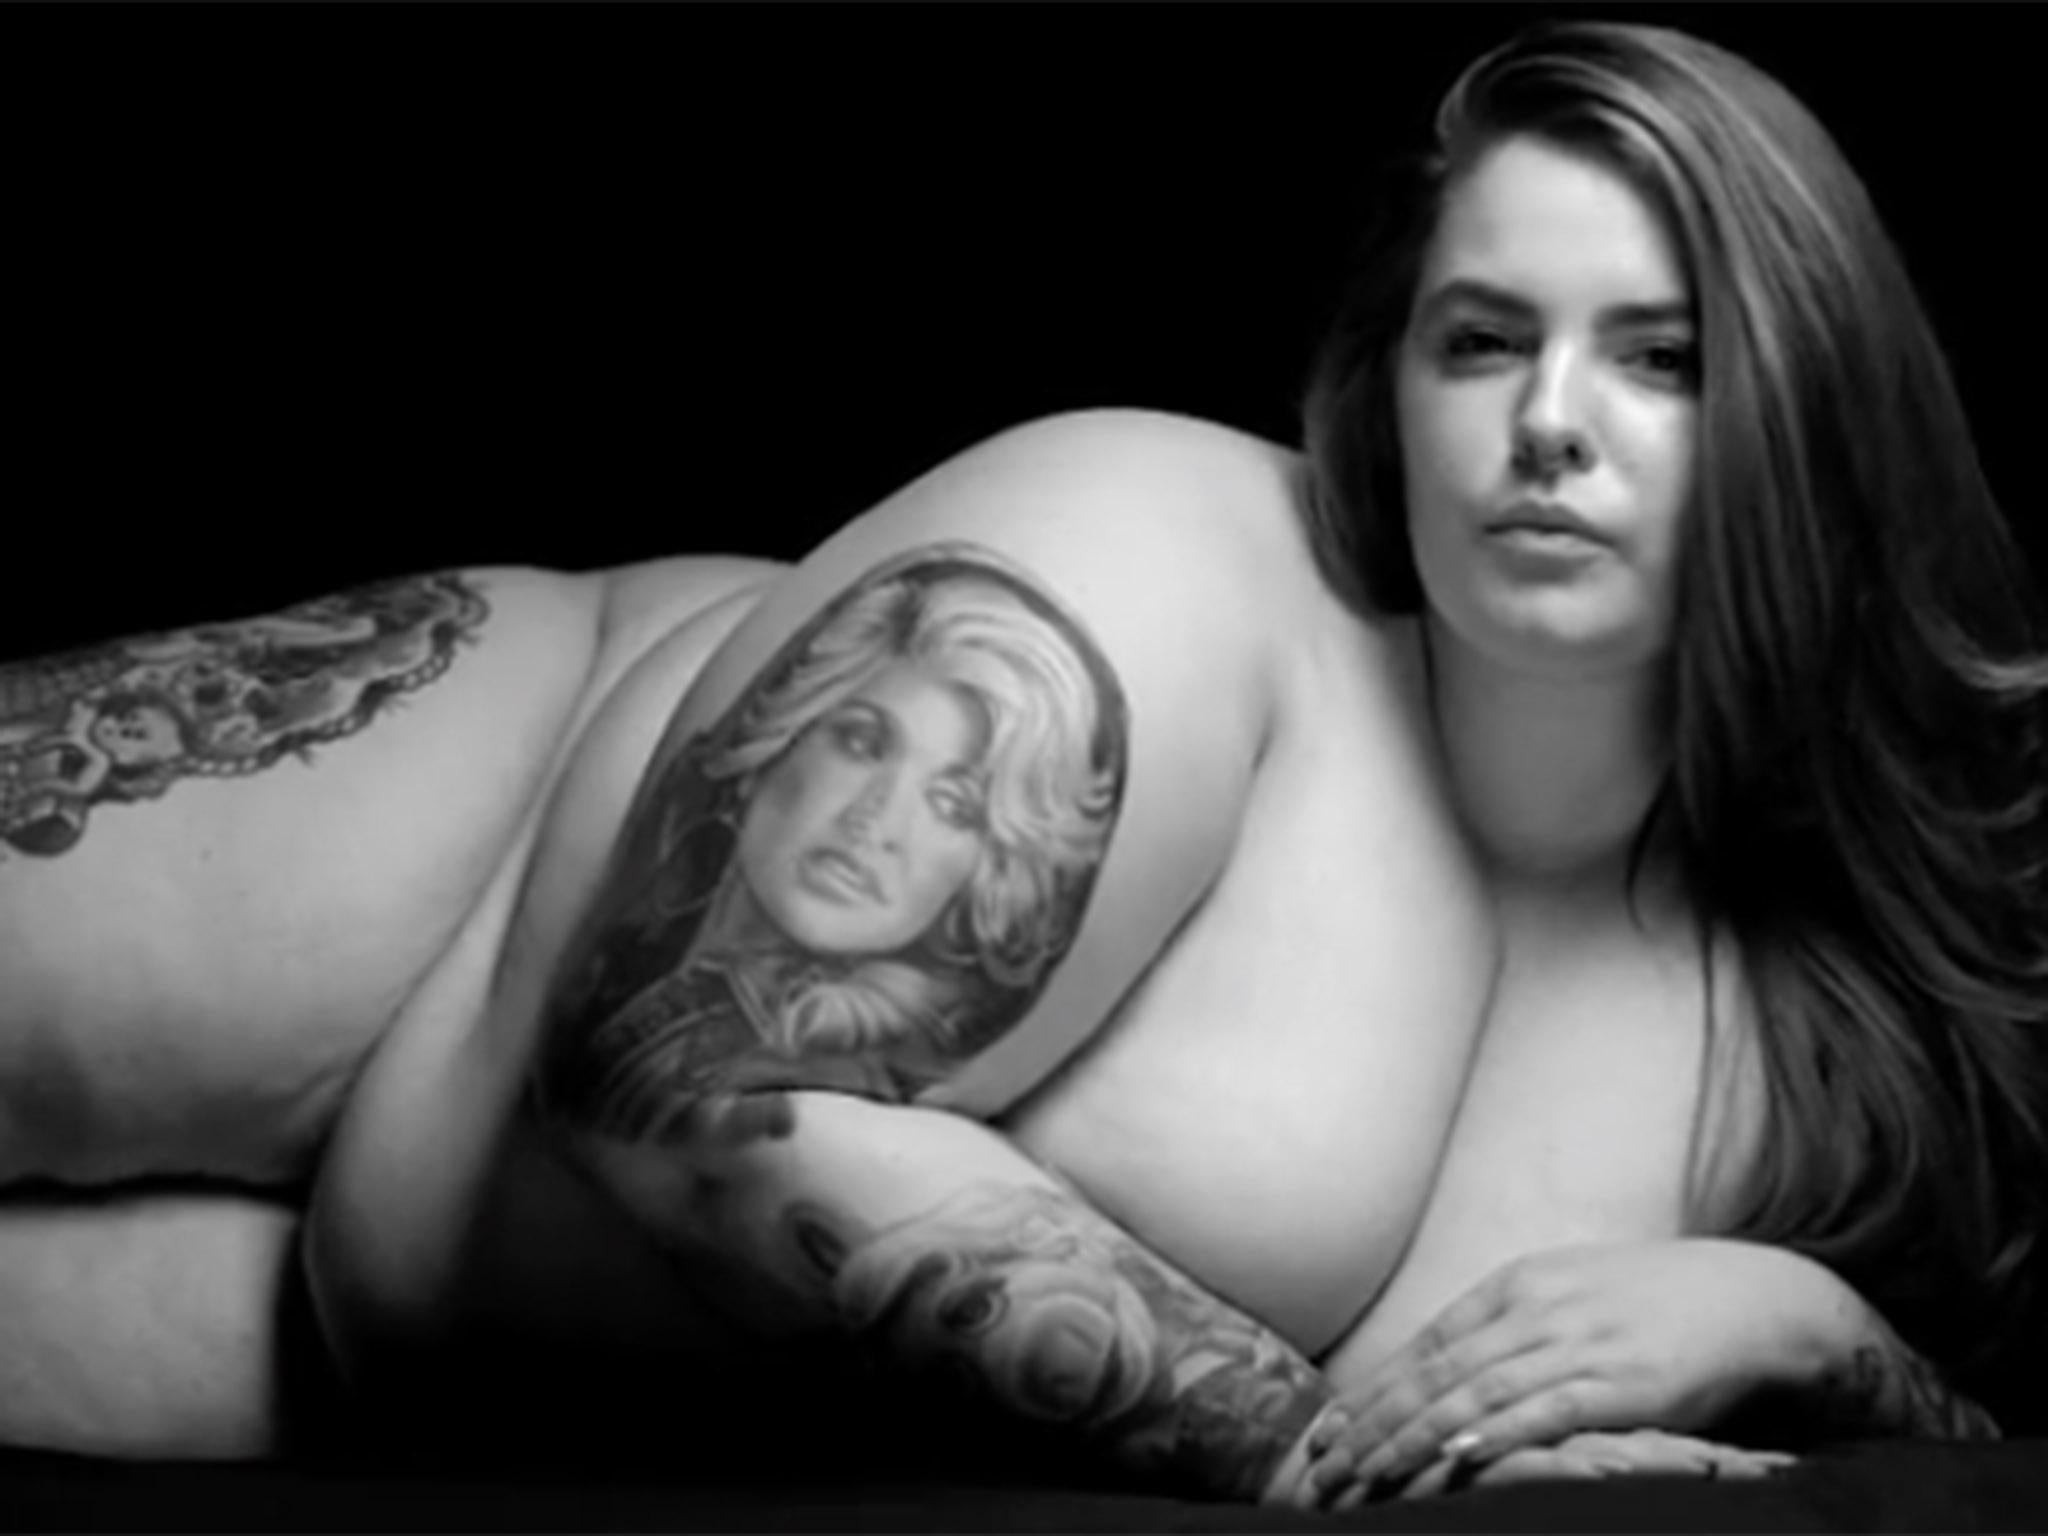 The size 22 model is never one to shy away from breaking boundaries